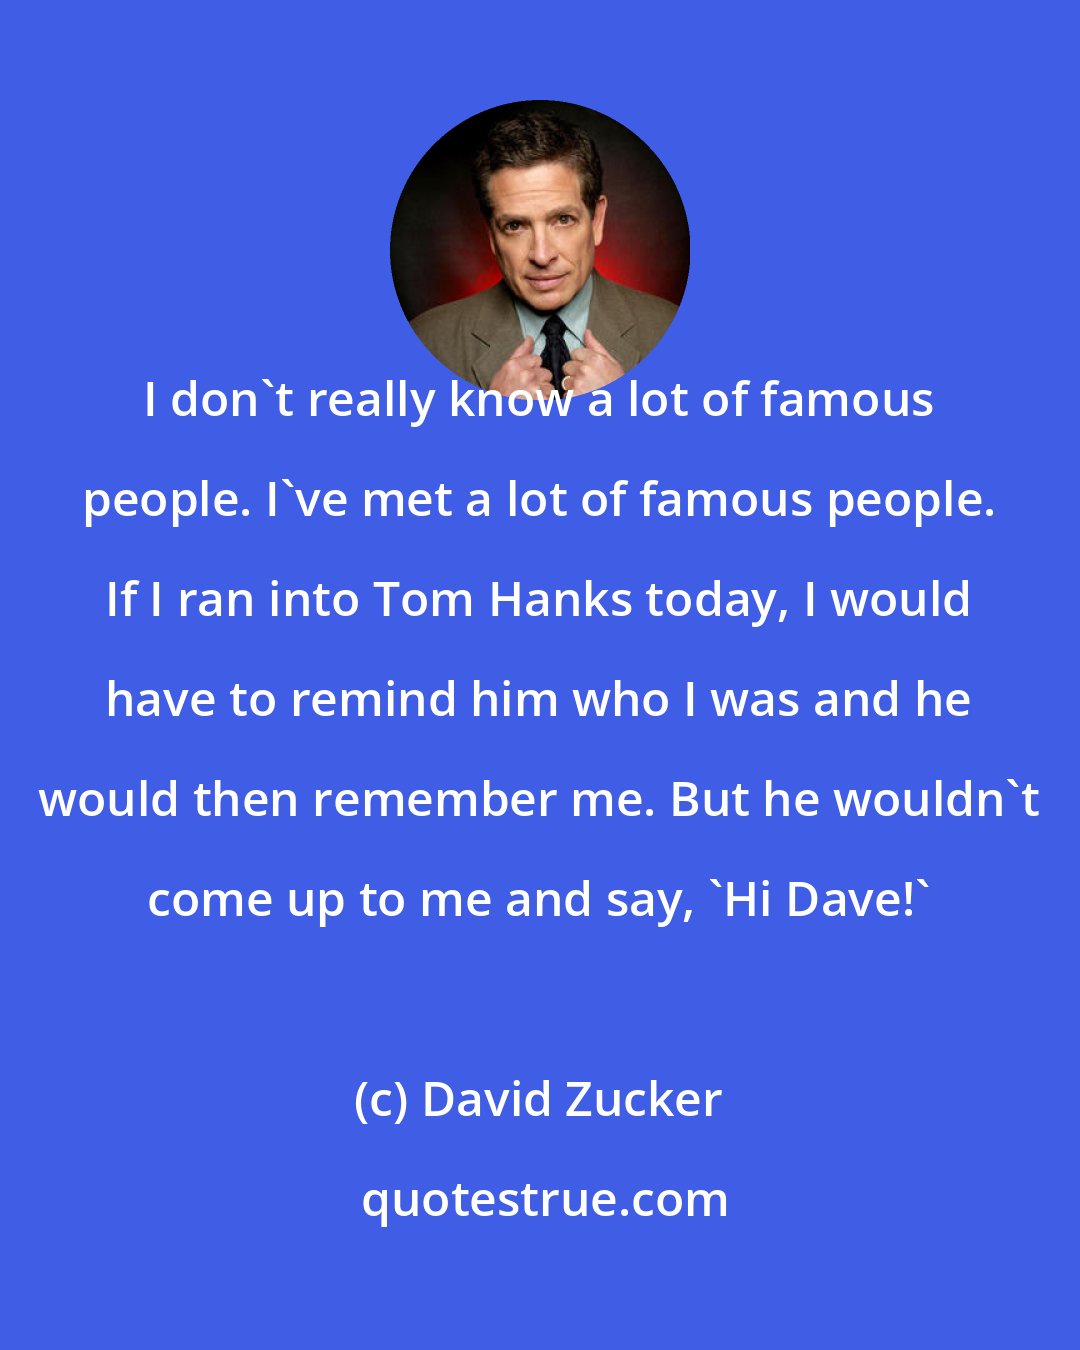 David Zucker: I don't really know a lot of famous people. I've met a lot of famous people. If I ran into Tom Hanks today, I would have to remind him who I was and he would then remember me. But he wouldn't come up to me and say, 'Hi Dave!'